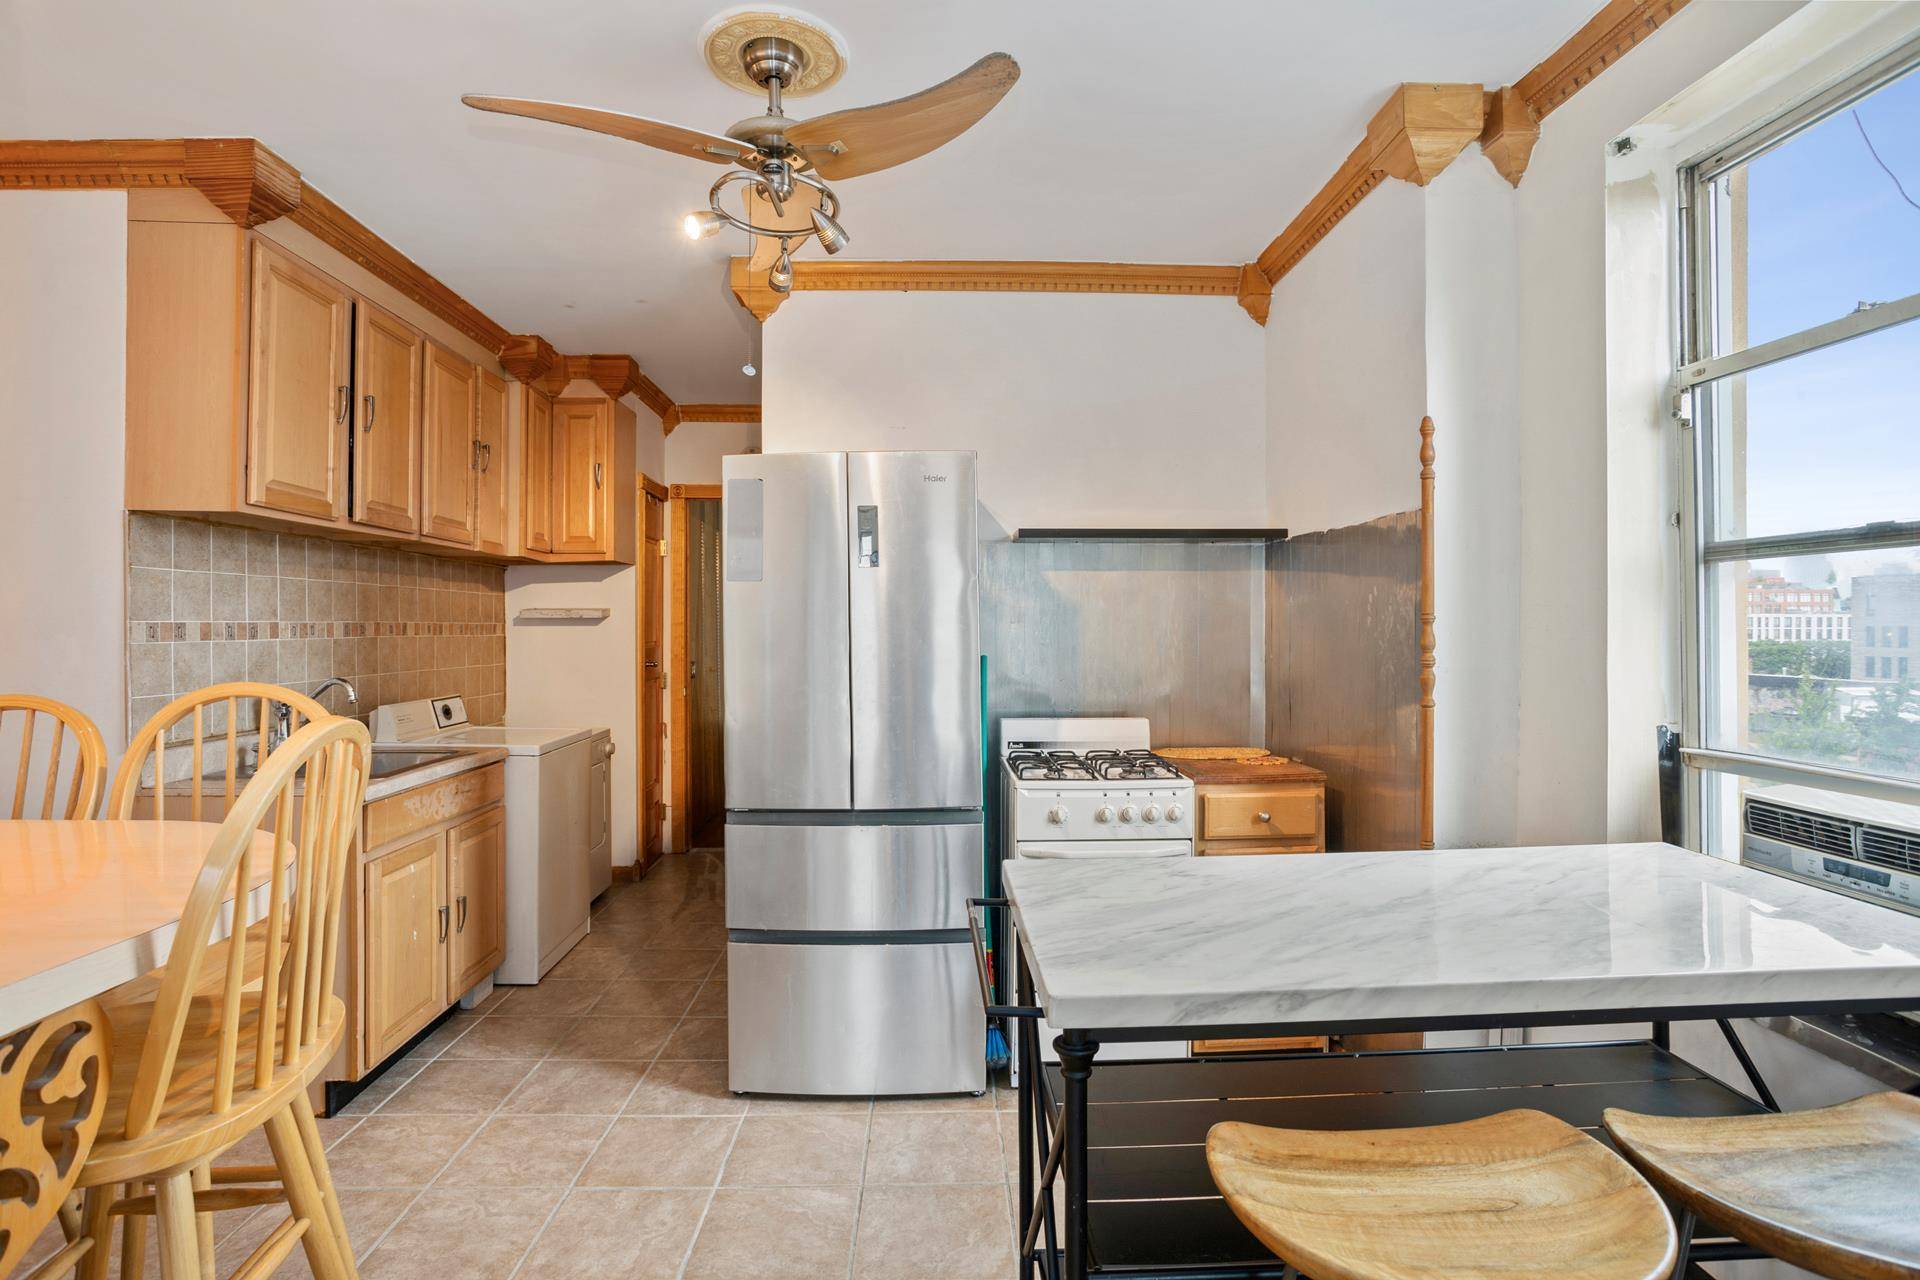 A true find, an affordable unit with low maintenance that can be lived in as is or renovate and customize to design your dream home and add considerable value.